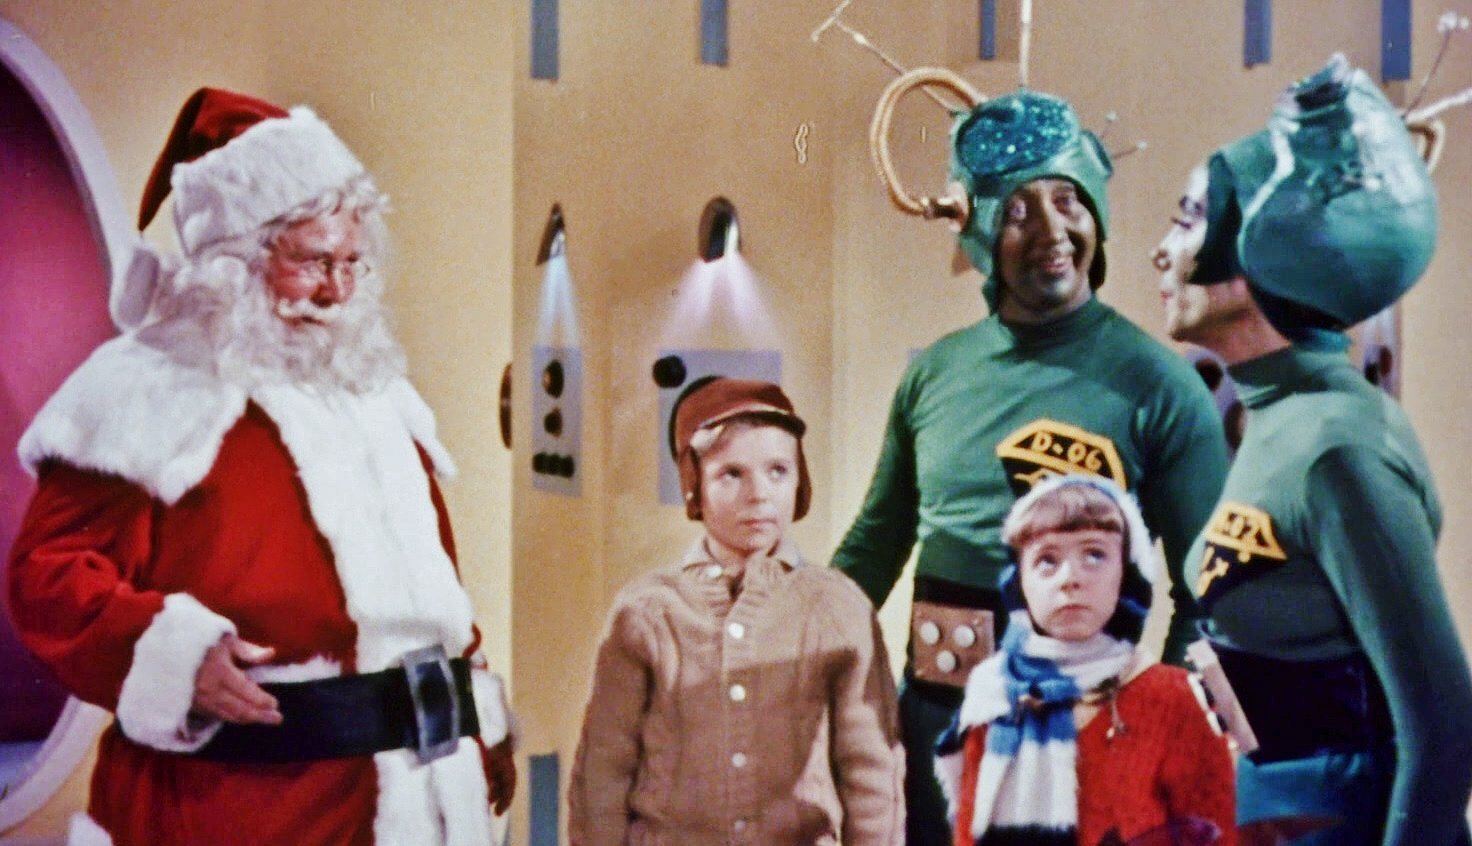 Santa talks to two people in martian outfits